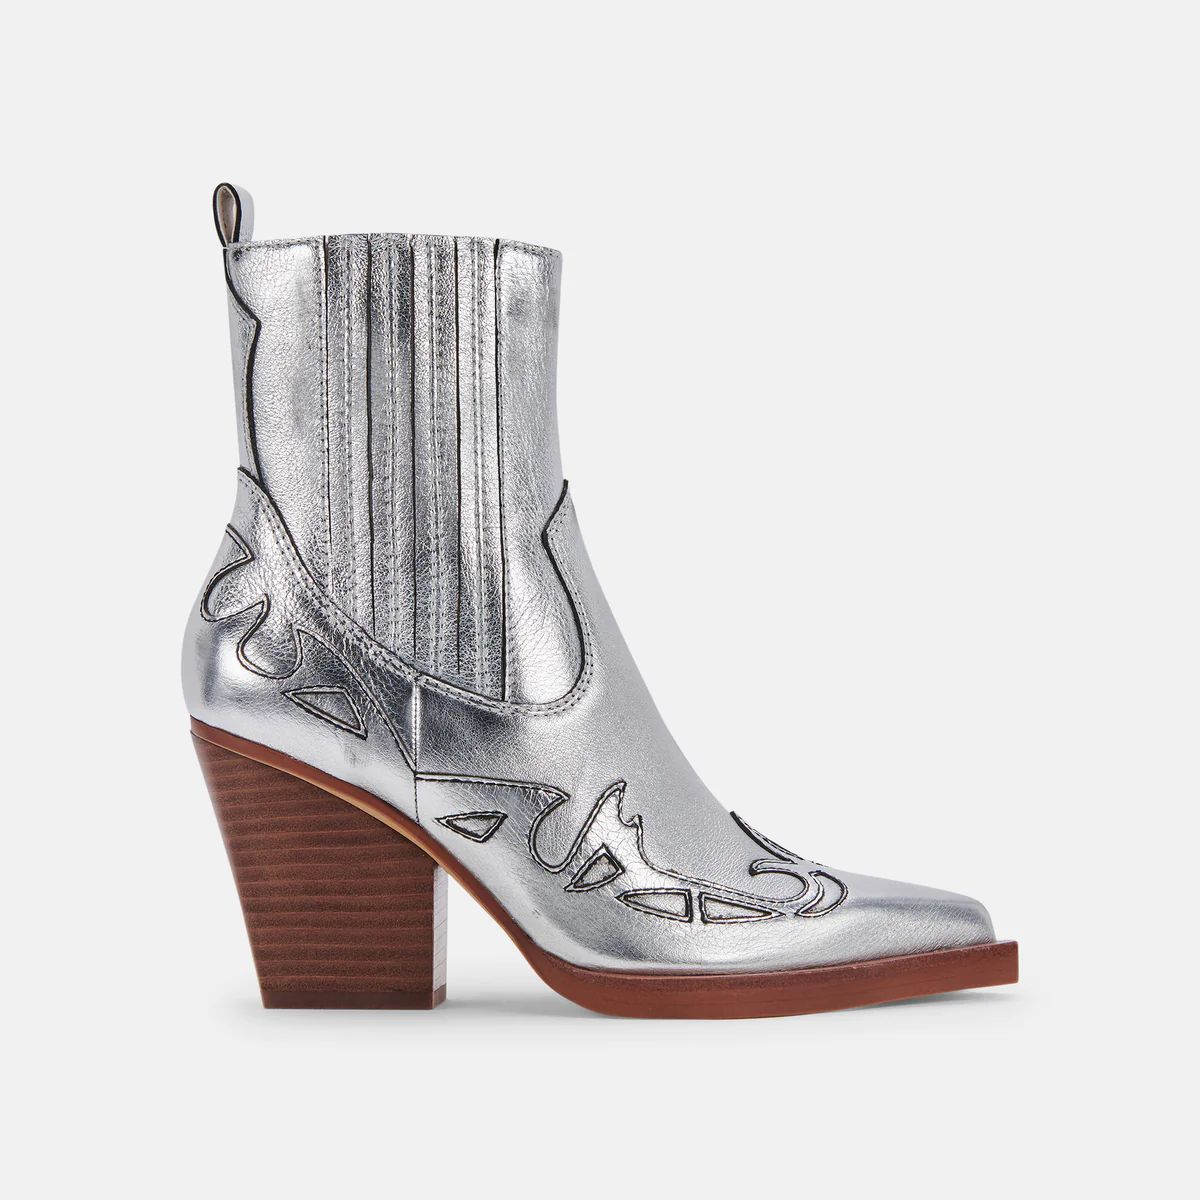 BEAUX BOOTS SILVER LEATHER | DolceVita.com